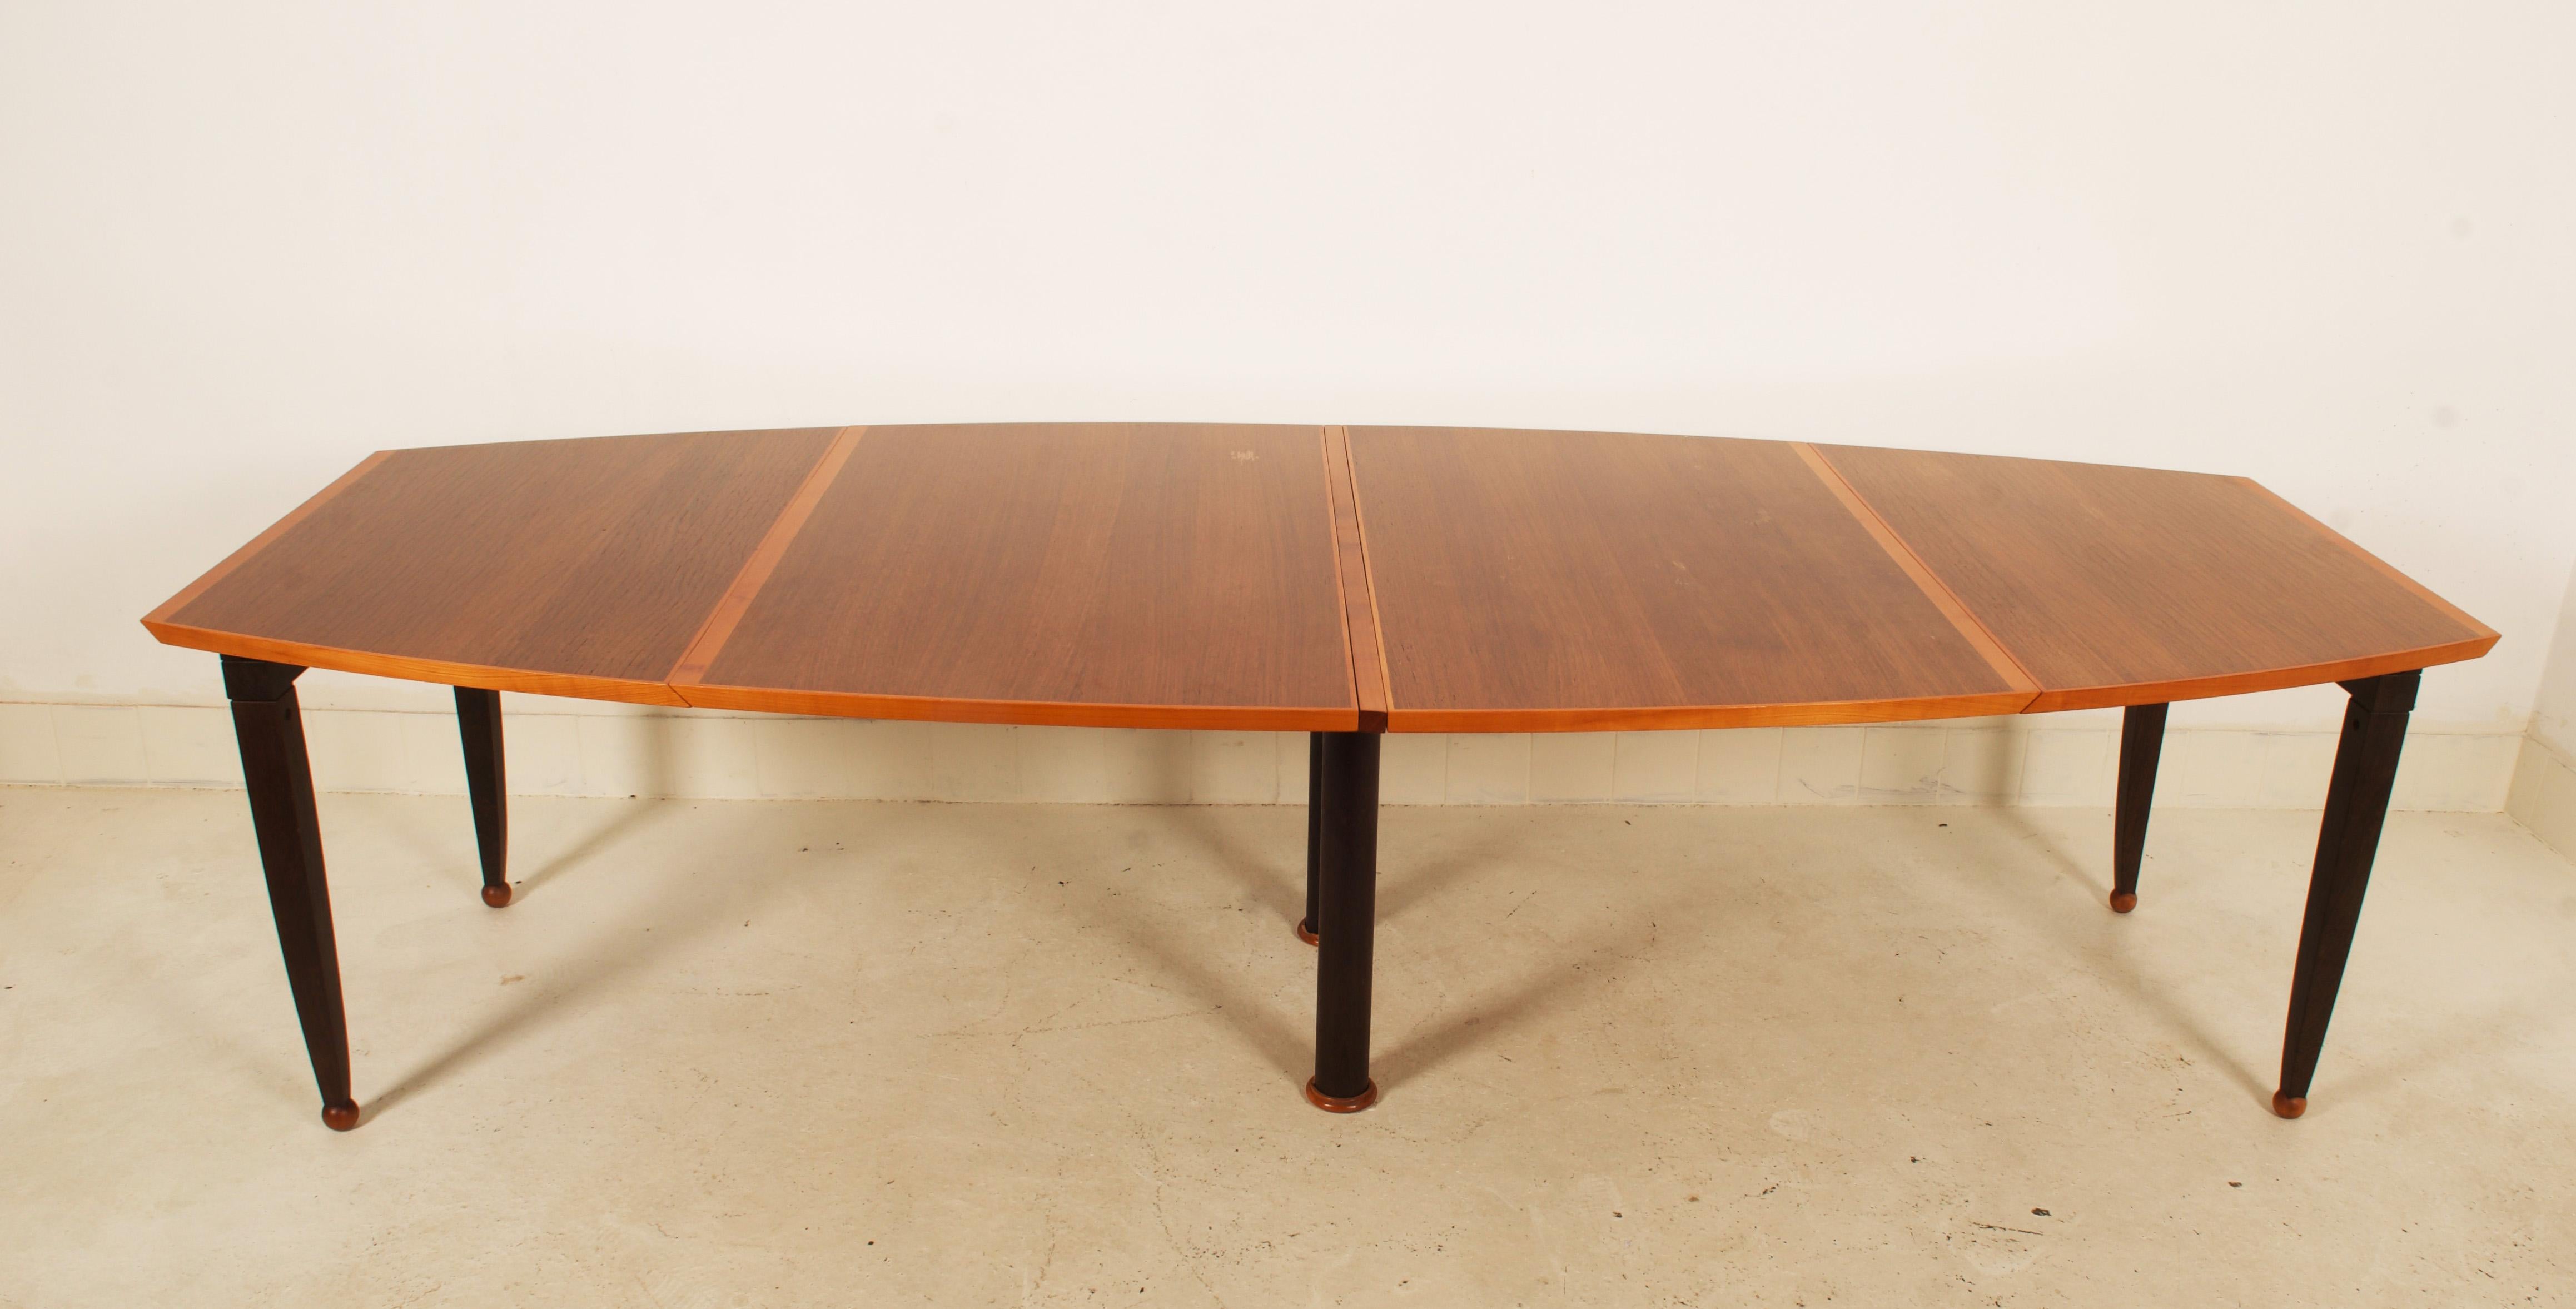 Tabula Magna Dining Table by Oscar Tosquets Blanca for Driade Aleph  For Sale 3